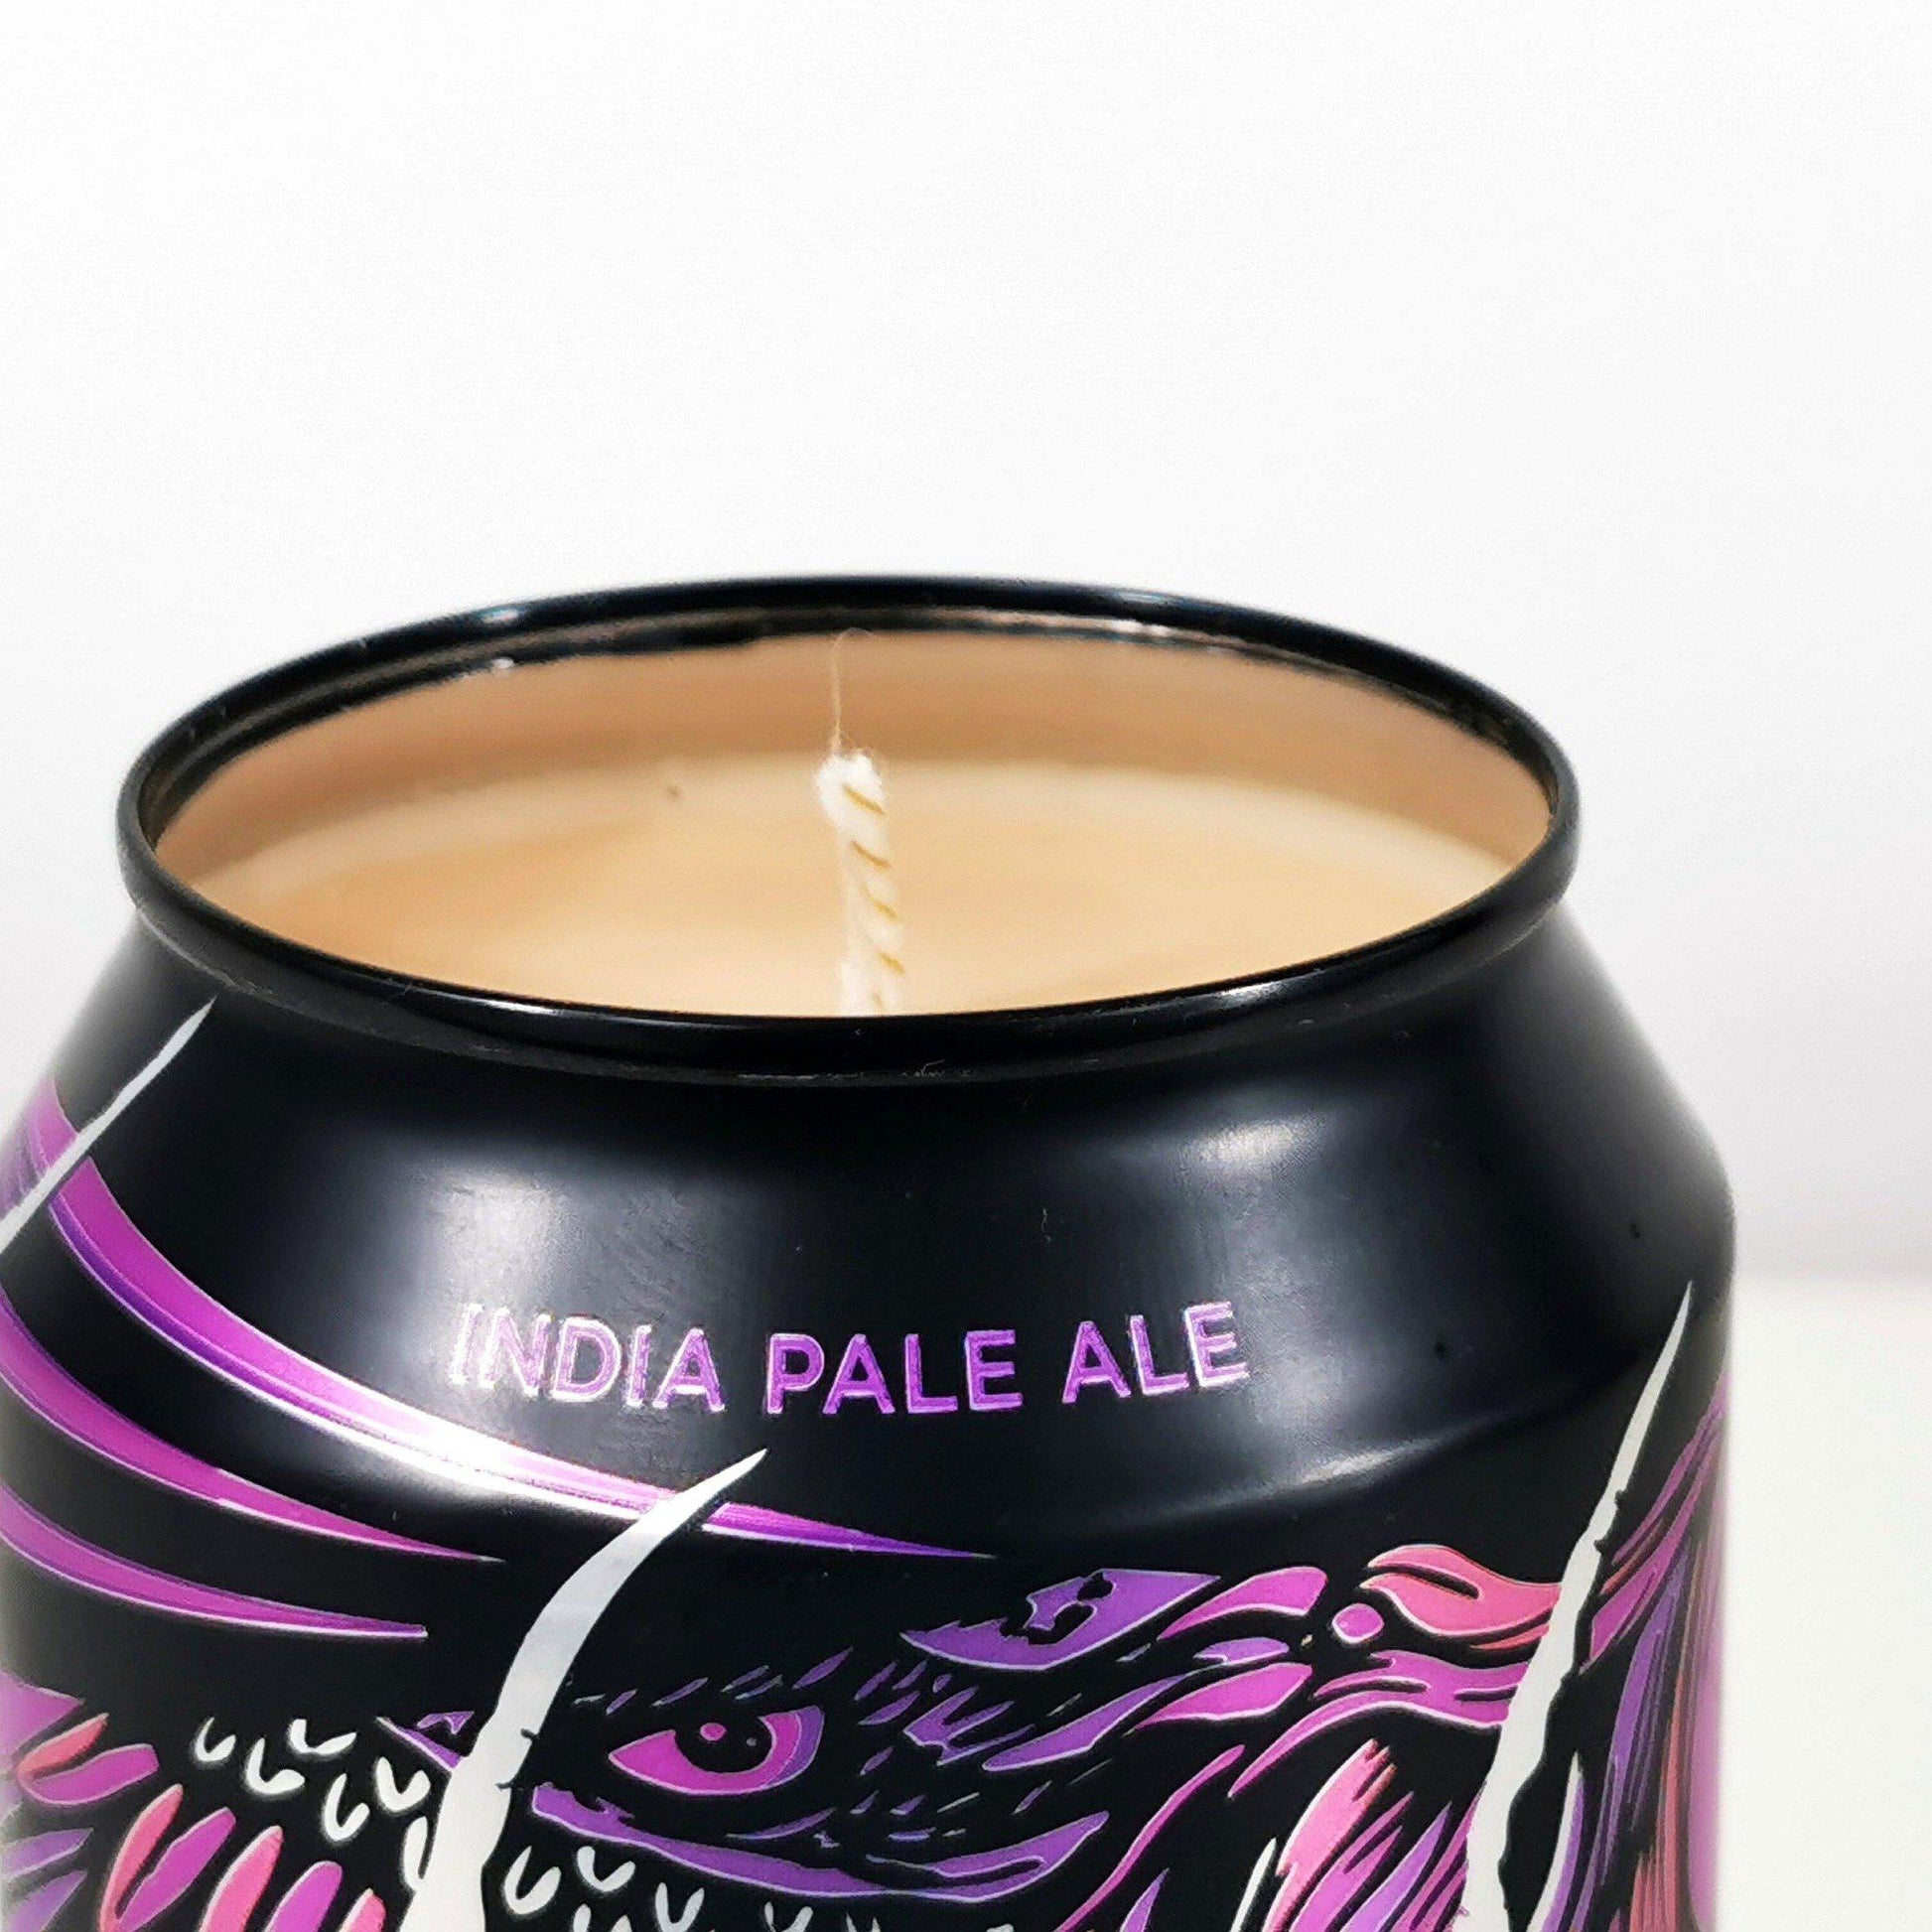 Soundwave IPA by Siren Craft Beer Can Candle-Beer Can Candles-Adhock Homeware